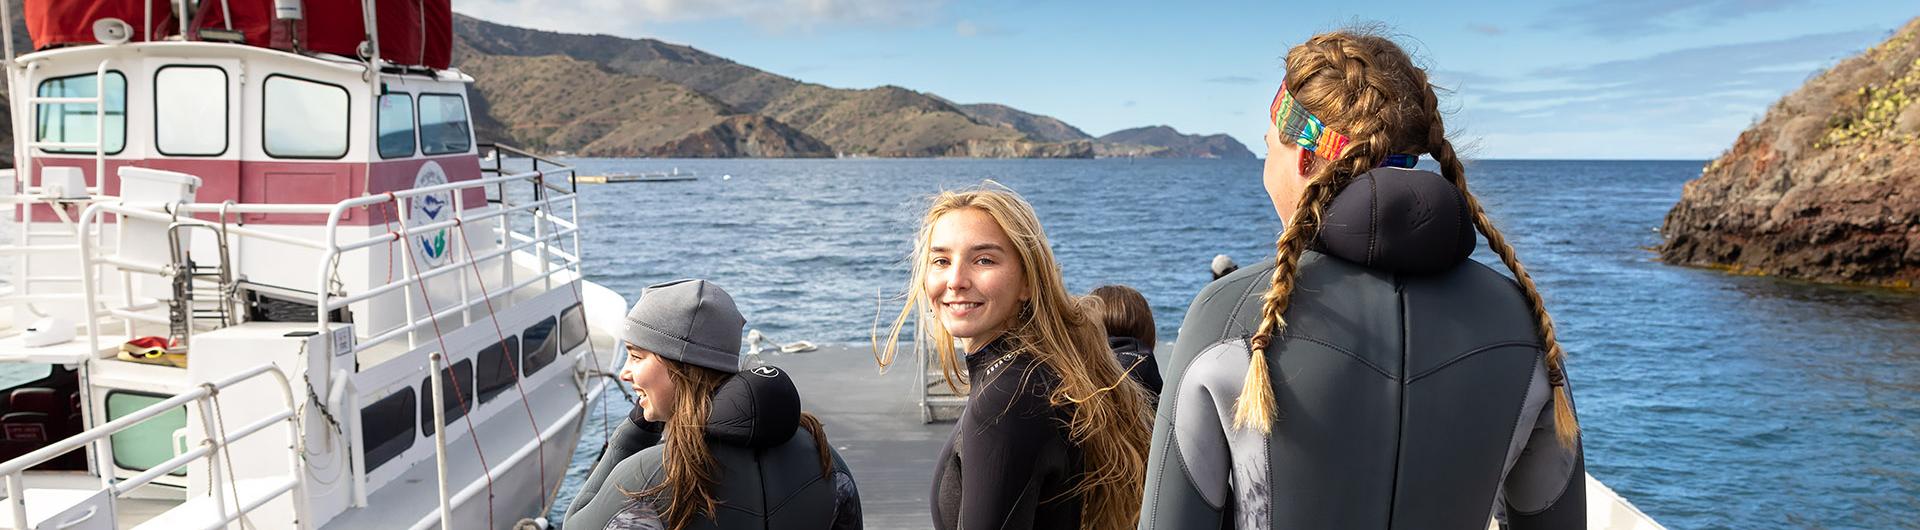 Group of CSULB students in Catalina Semester